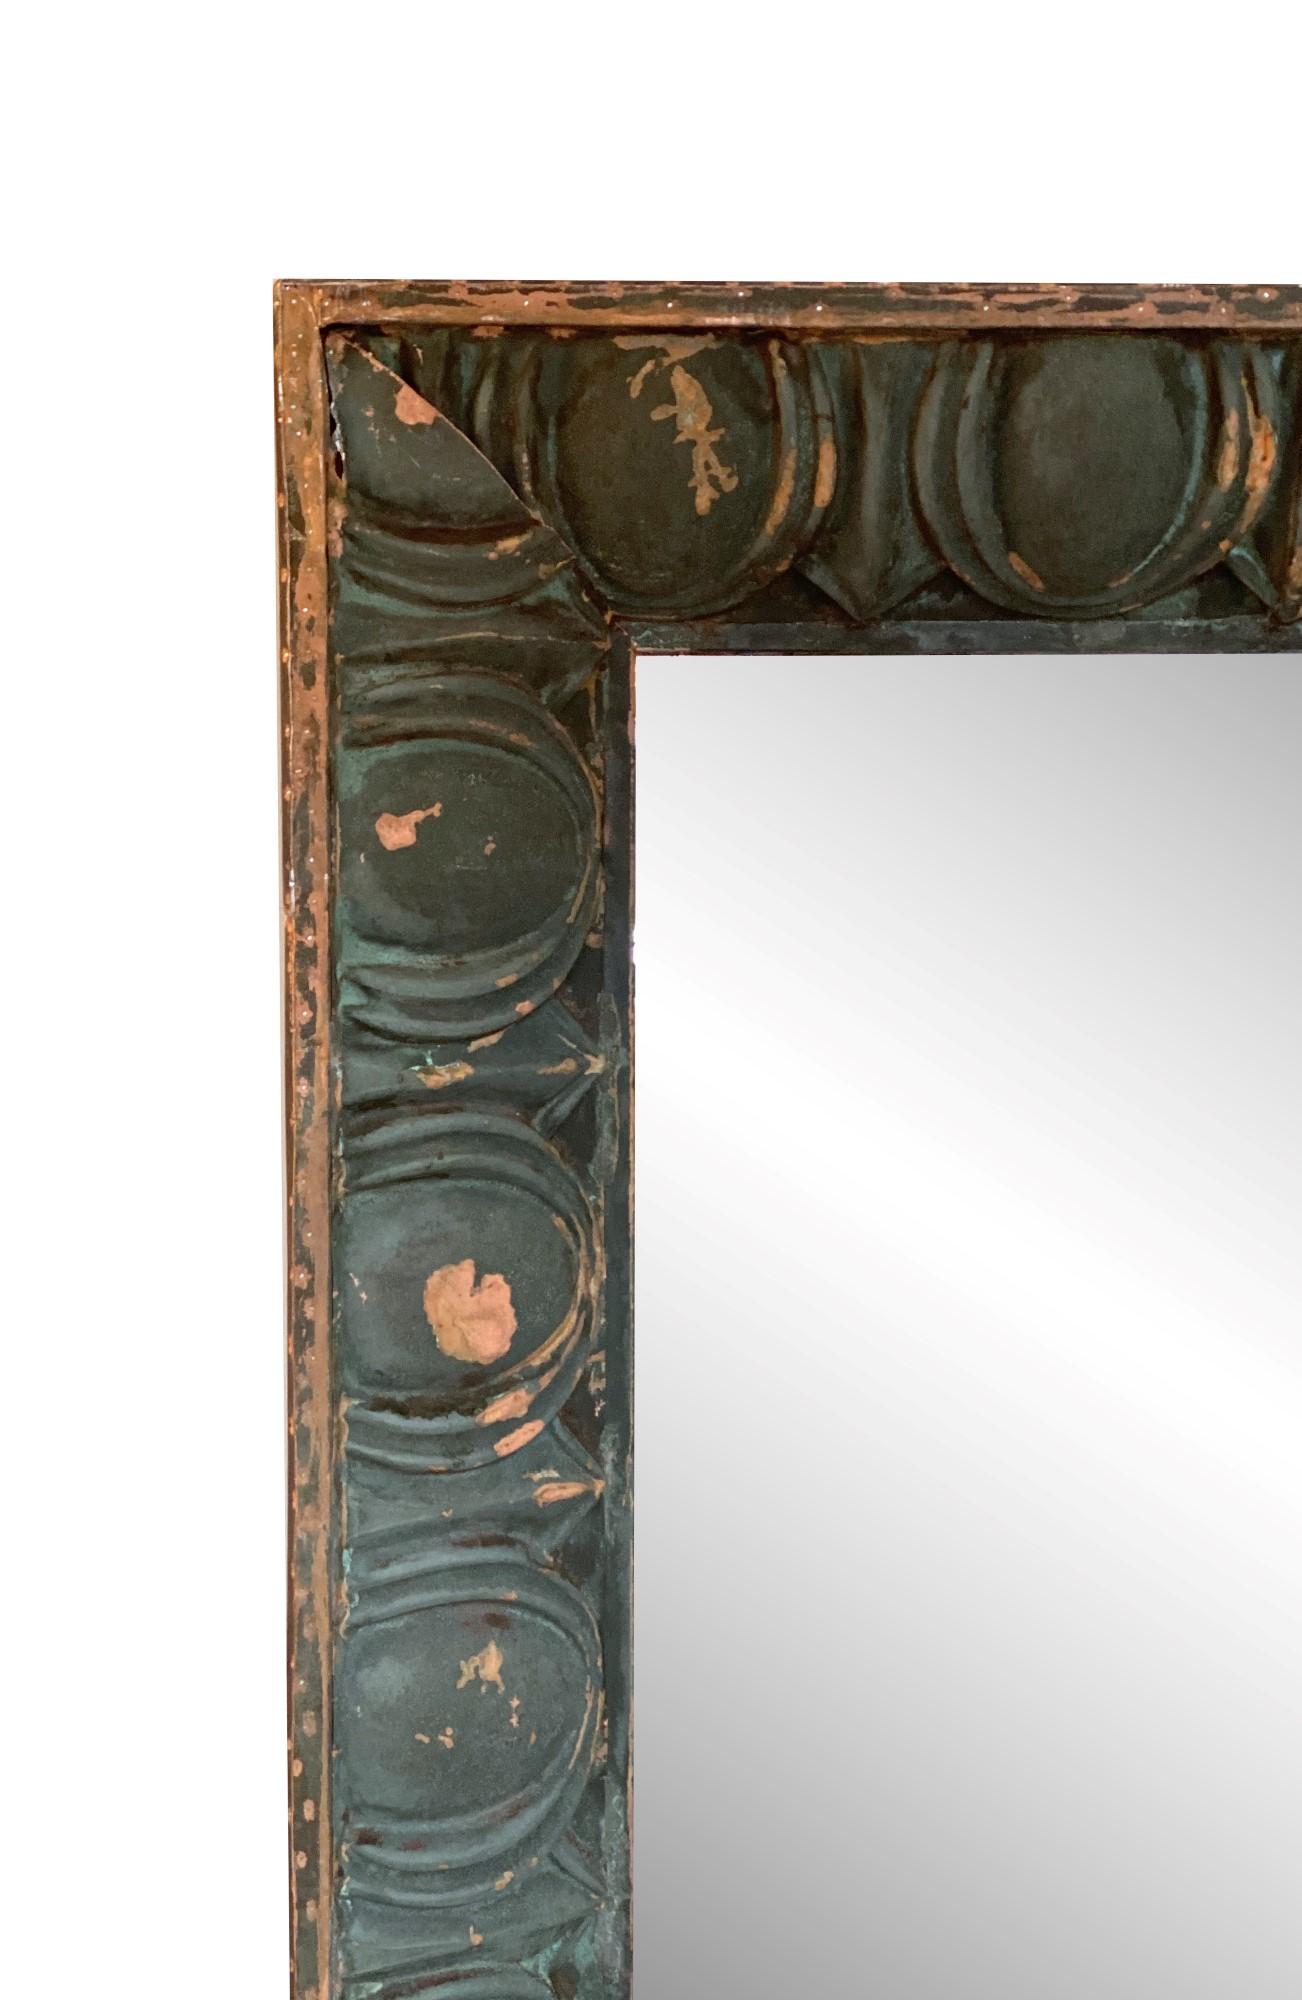 New mirror made from a reclaimed turn of the century copper building facade's soffit. Beefy 3 dimensional frame. This can be seen at our 333 West 52nd St location in the Theater District West of Manhattan.